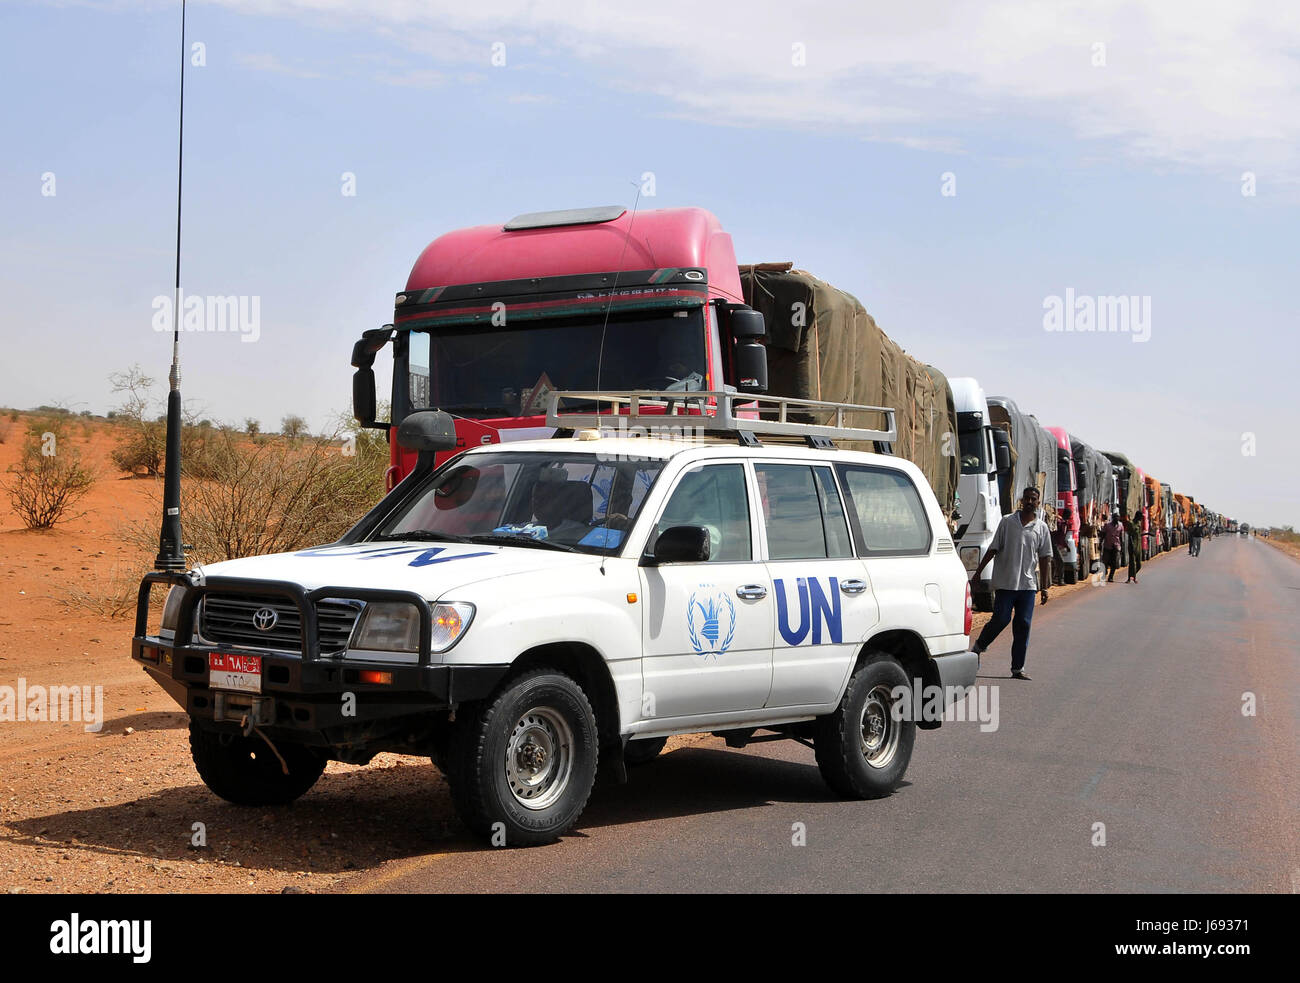 Khartoum. 19th May, 2017. Convoys carrying food materials are seen through the humanitarian corridor from Sudan's El Obied to Bentiu in Bahr el Ghazal State of South Soudan, May 19, 2017. The humanitarian corridors recently opened by Sudan government have contributed to the delivery of humanitarian aid to South Sudanese citizens and to lessening the famine there, according to aid organizations. Credit: Mohamed Babiker/Xinhua/Alamy Live News Stock Photo